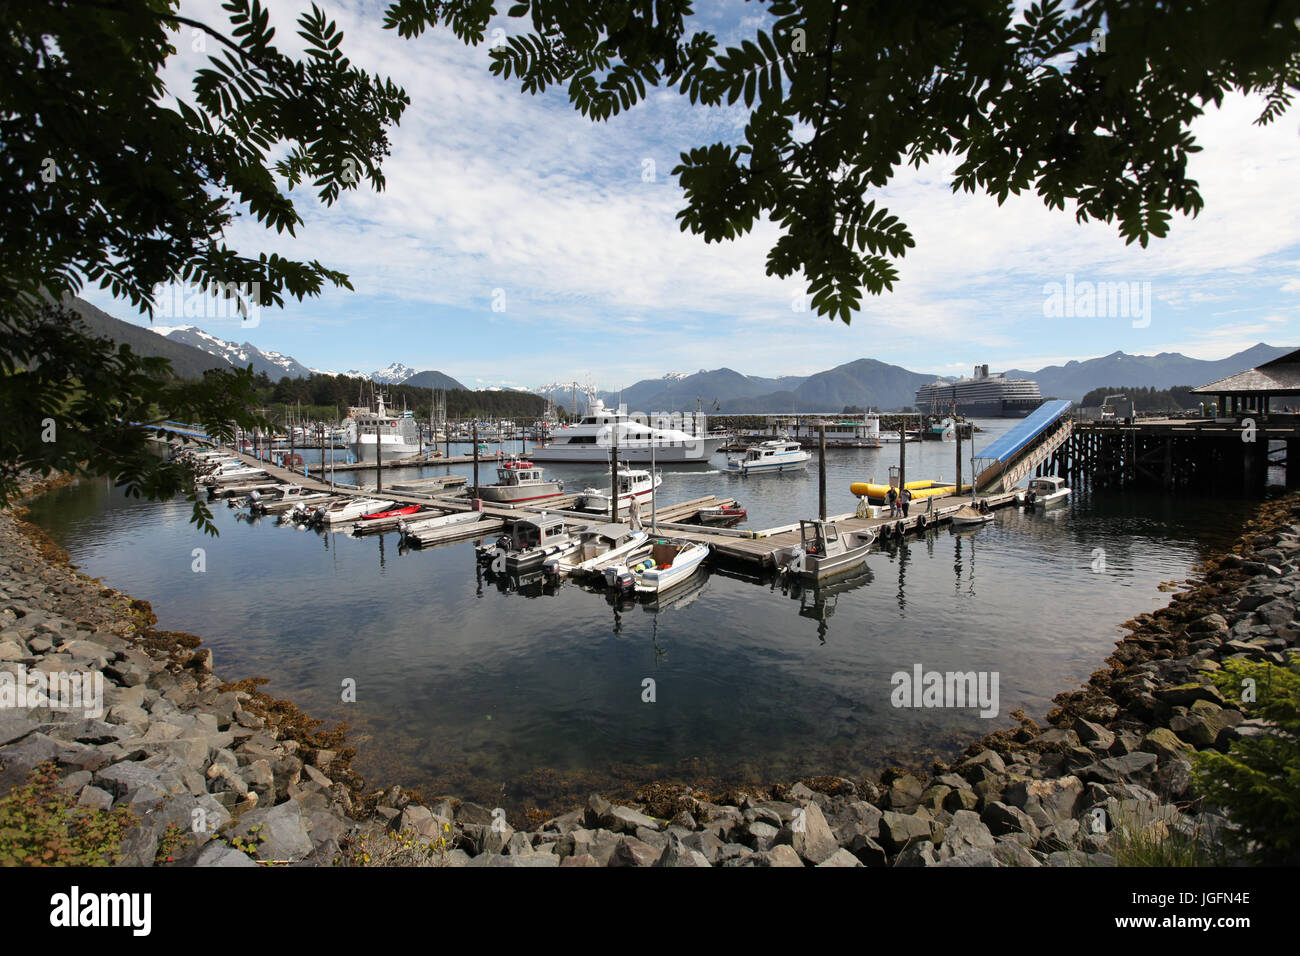 Boats line docks in a cove at a marina in Sitka, Alaska. Stock Photo